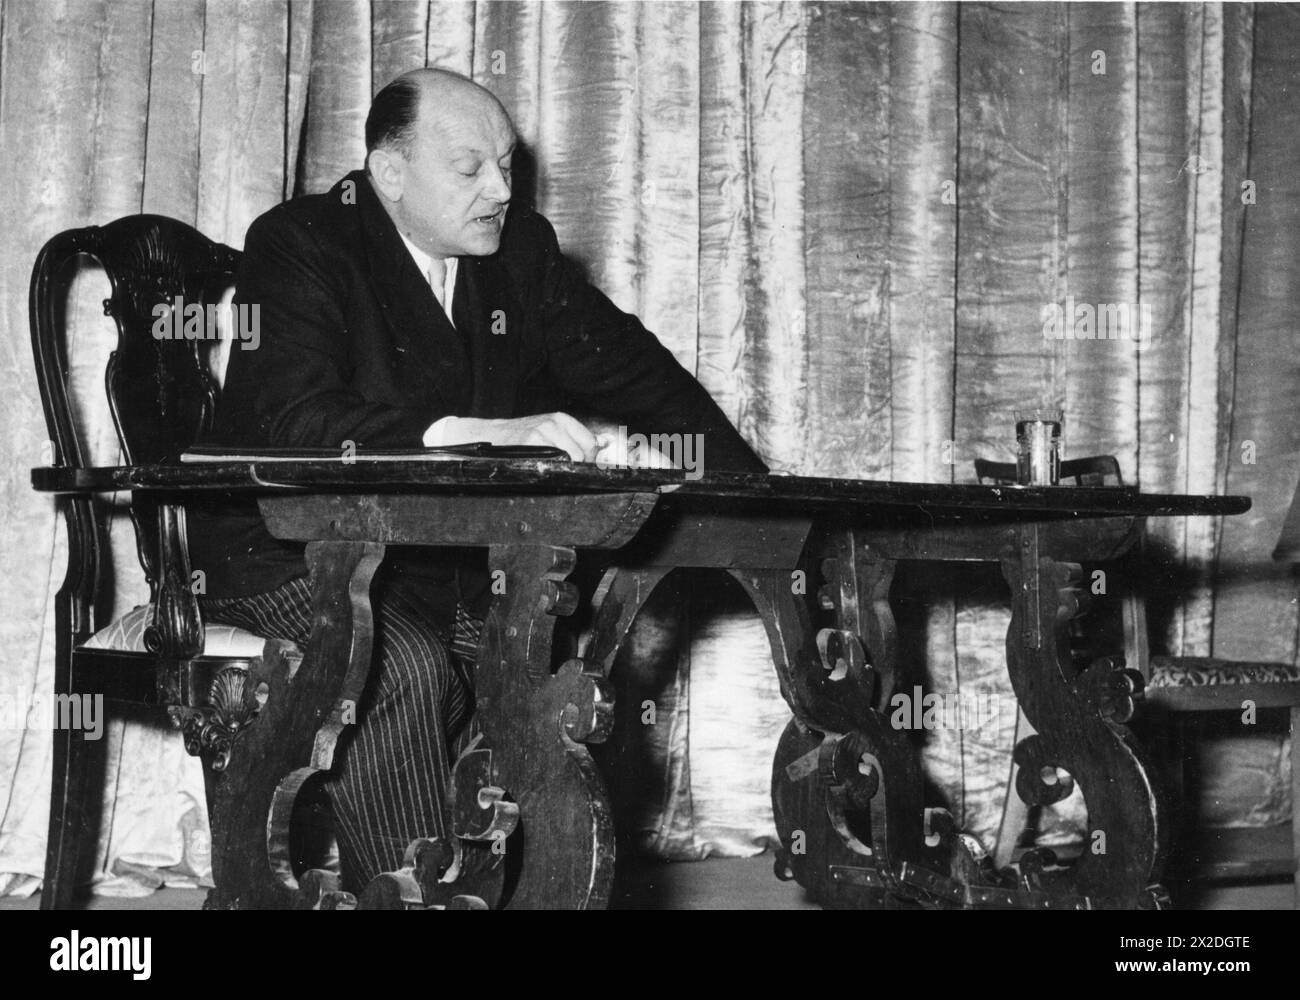 Schoeningh, Francis Joseph, 25.7.1902 - 8.12.1960, German journalist and publicist, during a recital, ADDITIONAL-RIGHTS-CLEARANCE-INFO-NOT-AVAILABLE Stock Photo